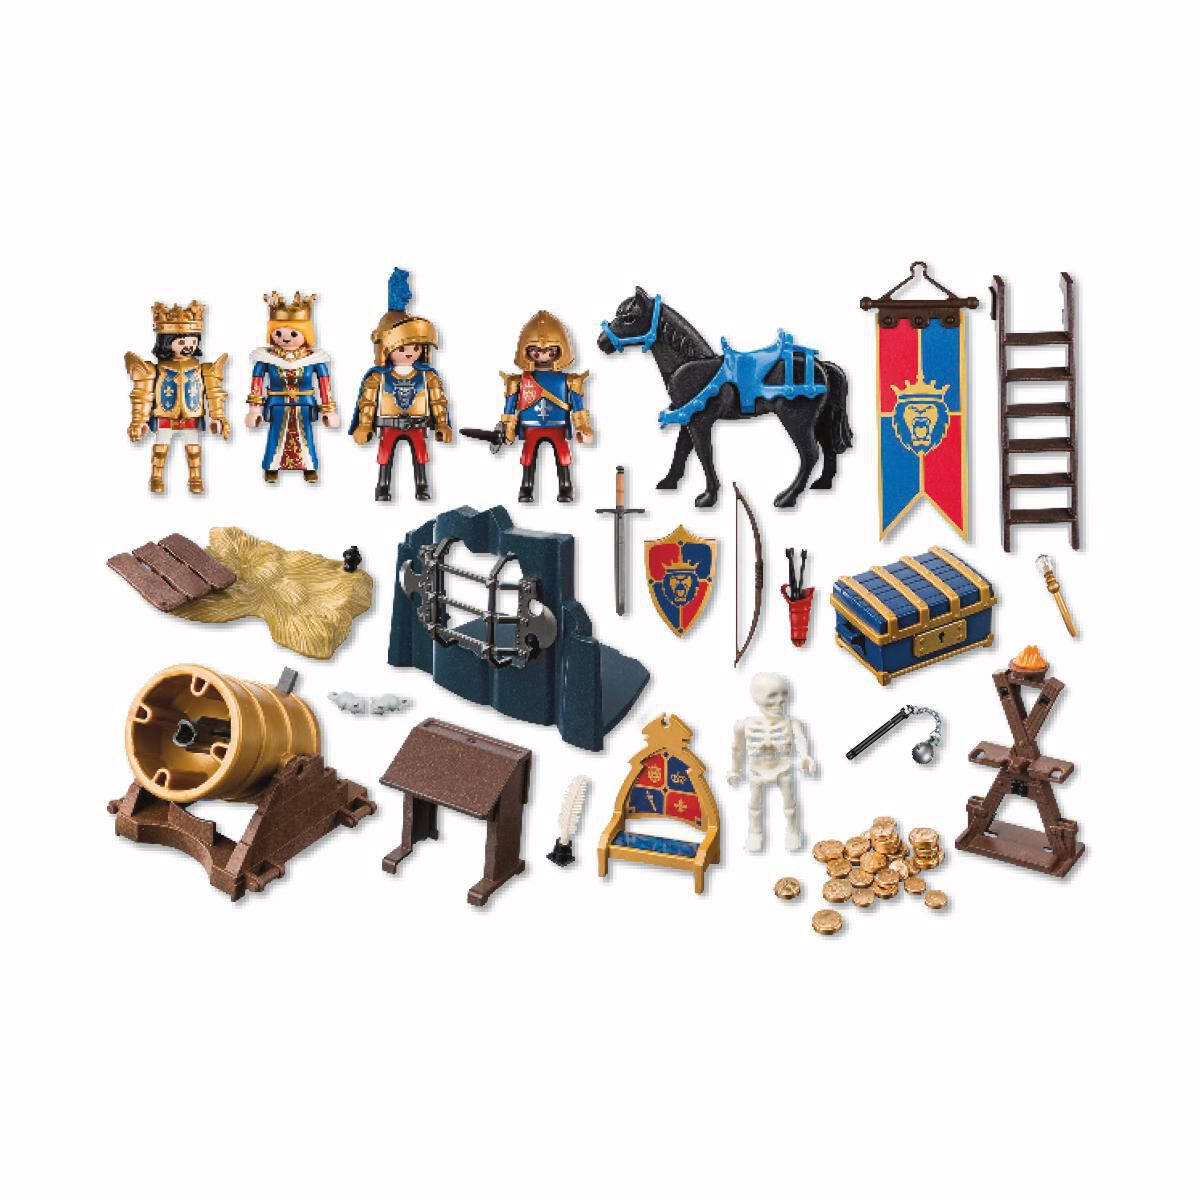 Playmobil @ @ chateau knight @ campfire @ @ indian middle ages 2